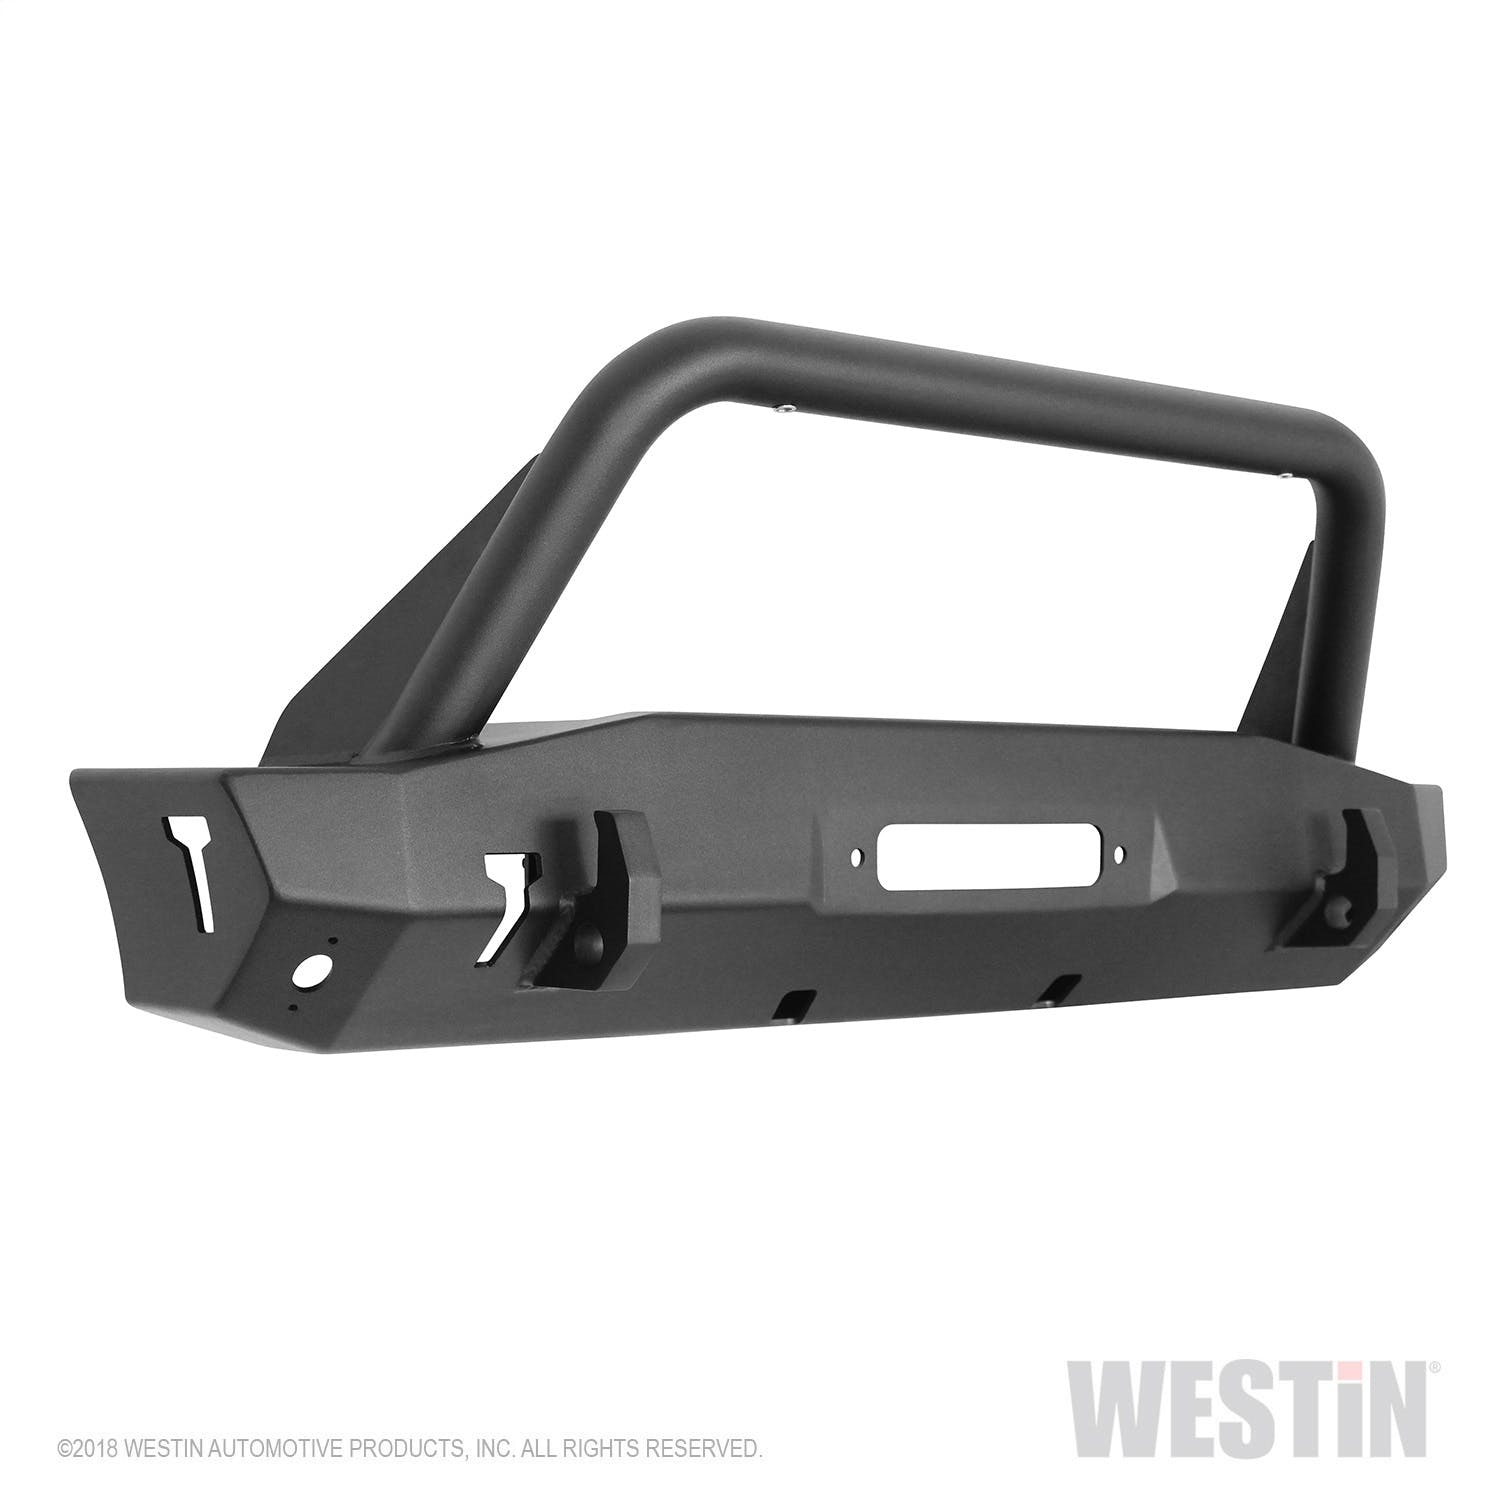 Westin Automotive 59-80075 WJ2 Stubby Front Bumper with Bull Bar Textured Black